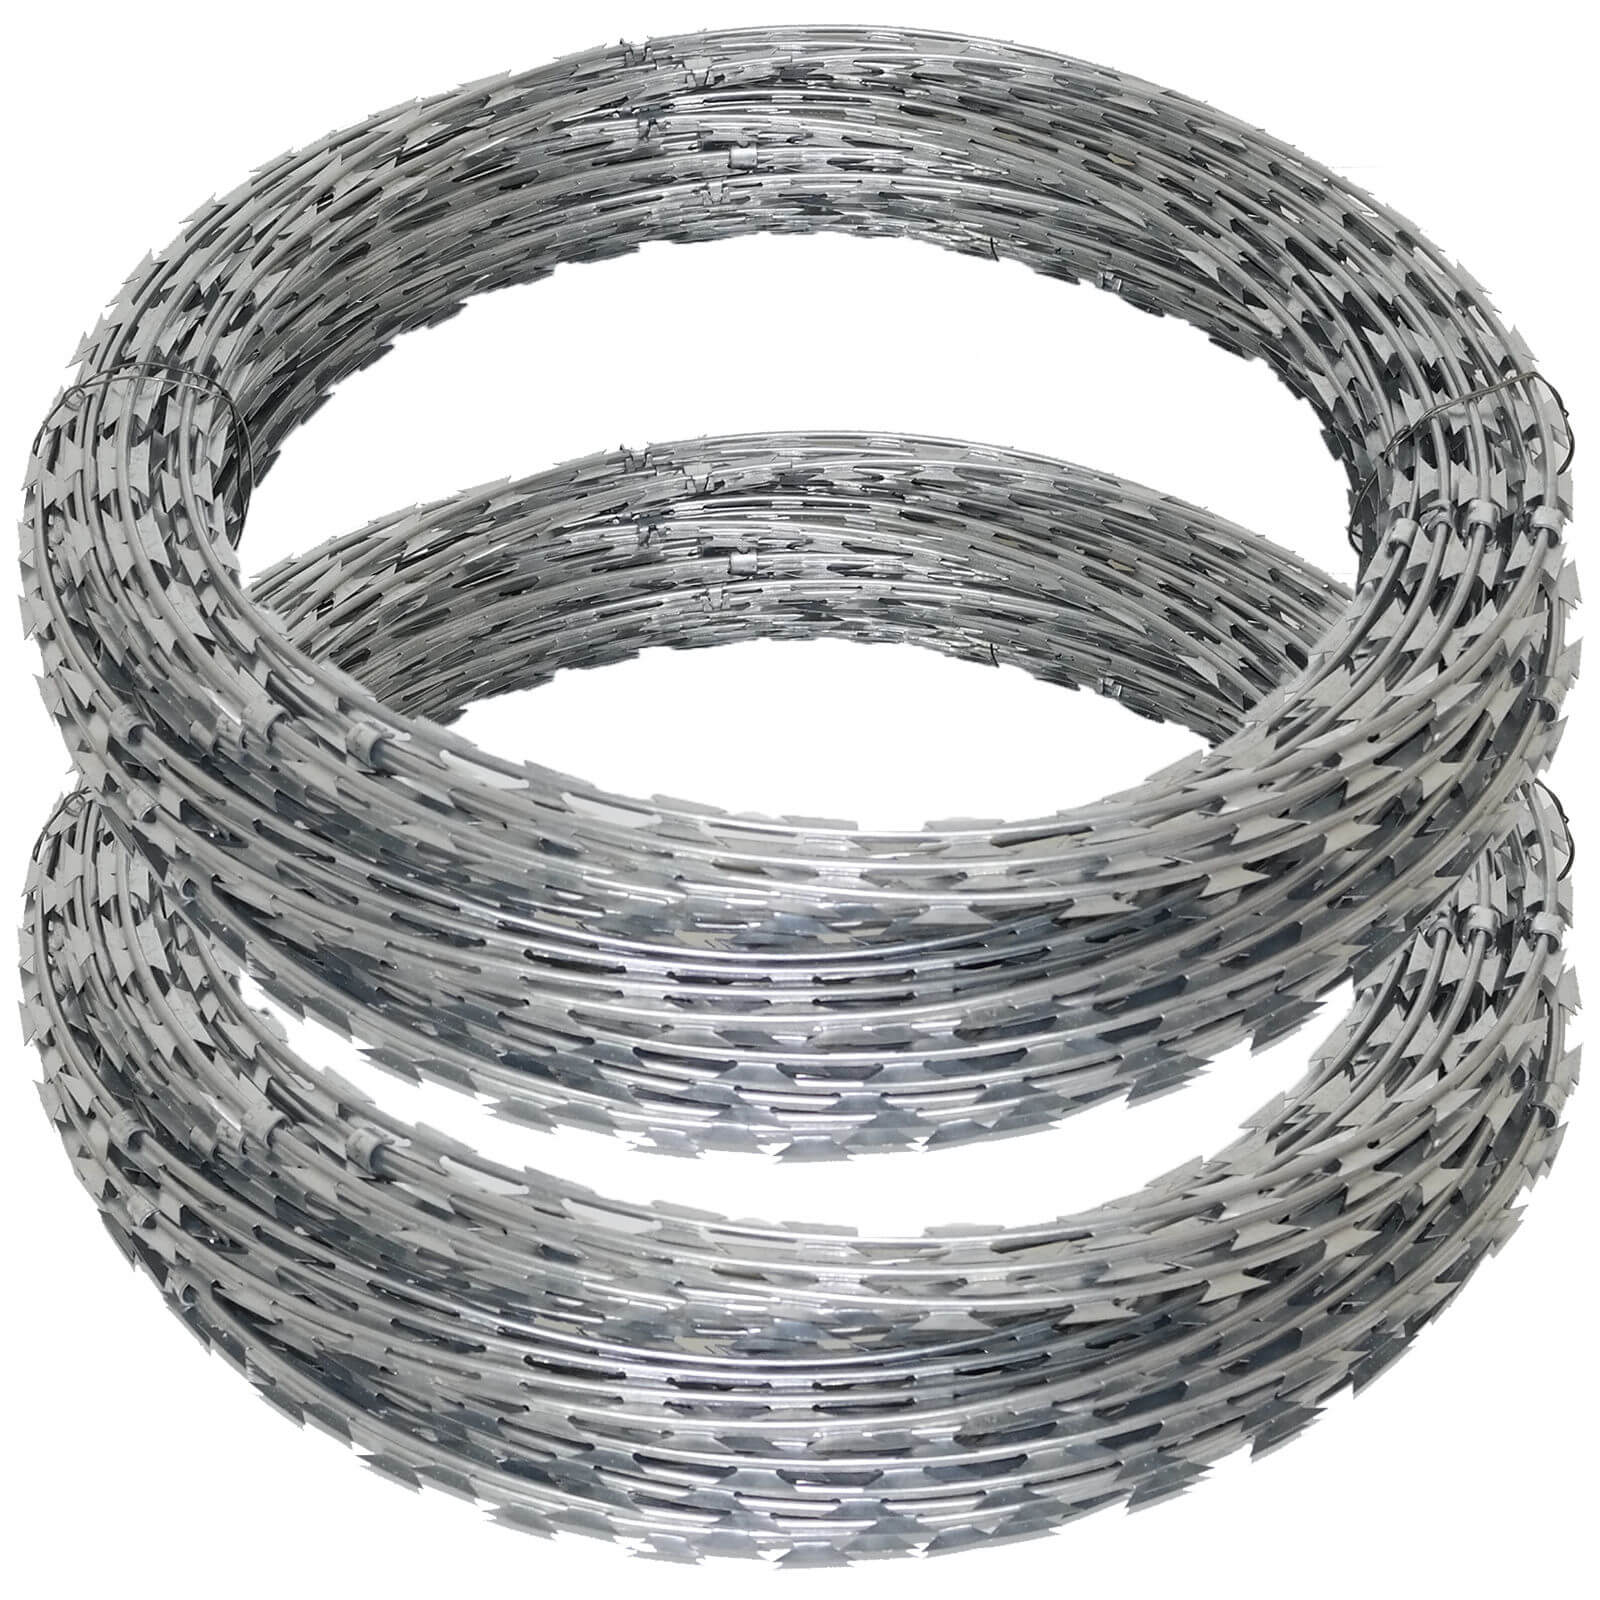 Razor wire for high-security facilities